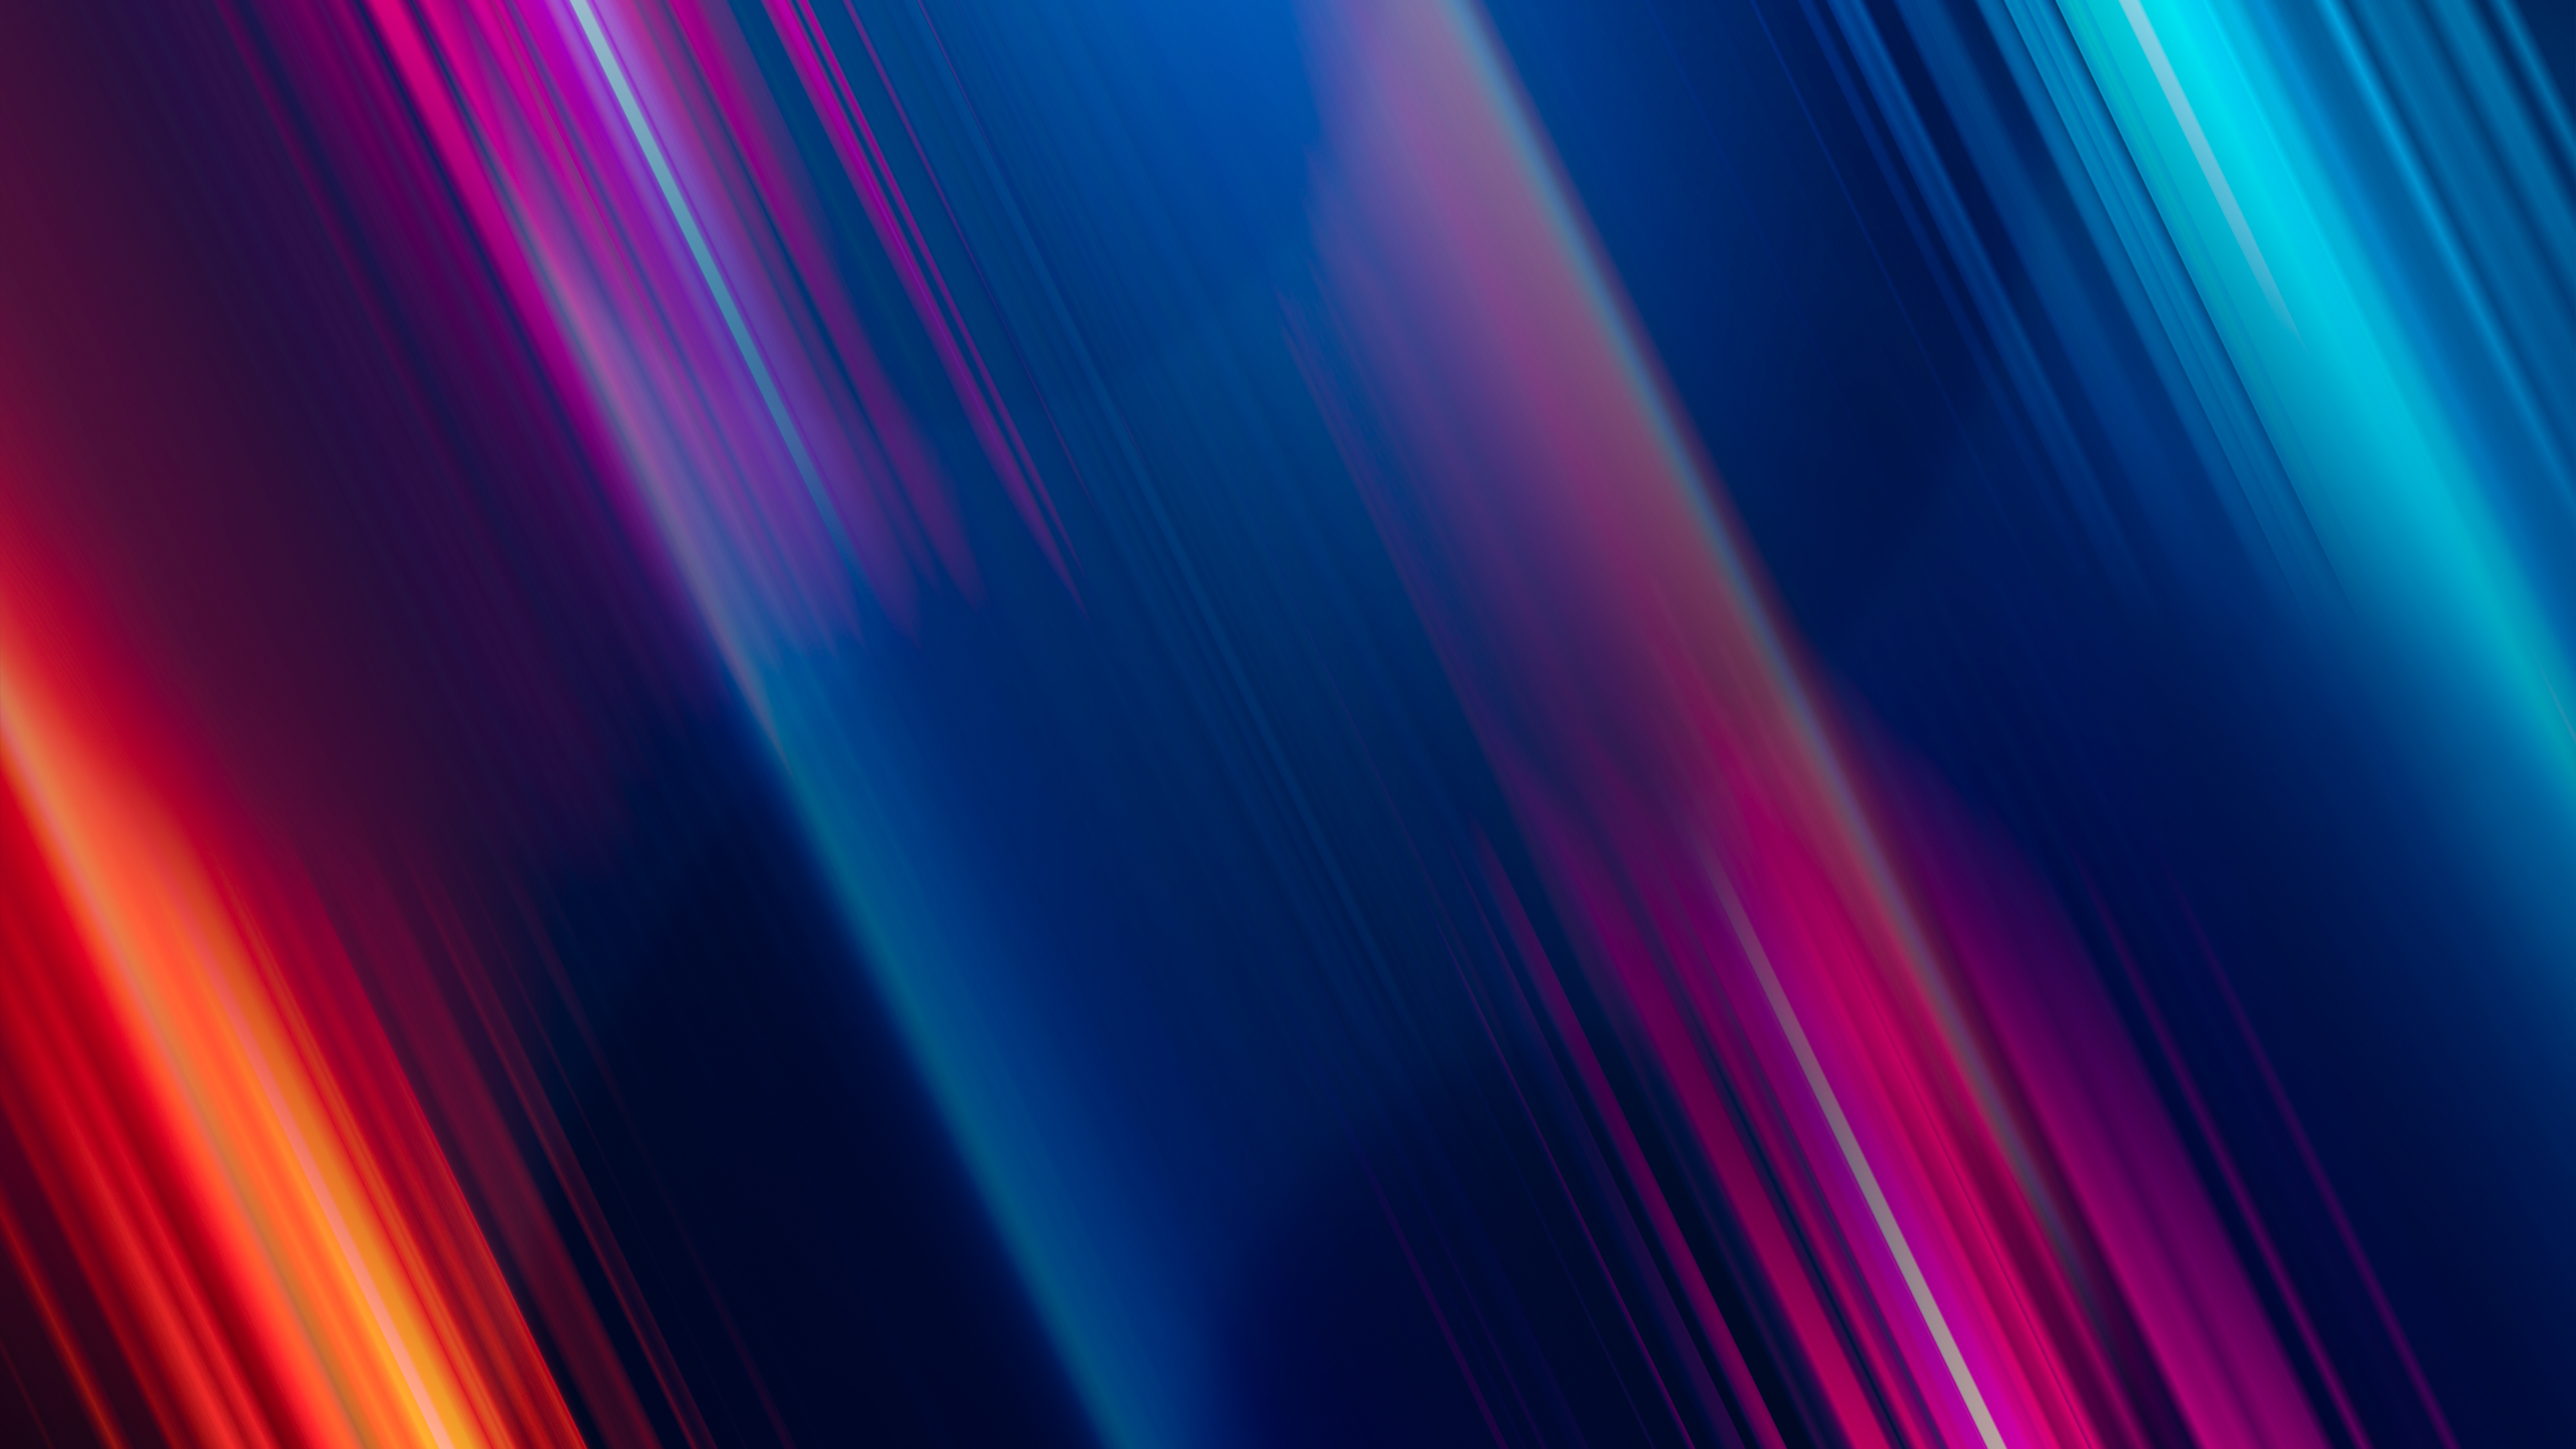 Abstract Diagonal Lines 3840x2160